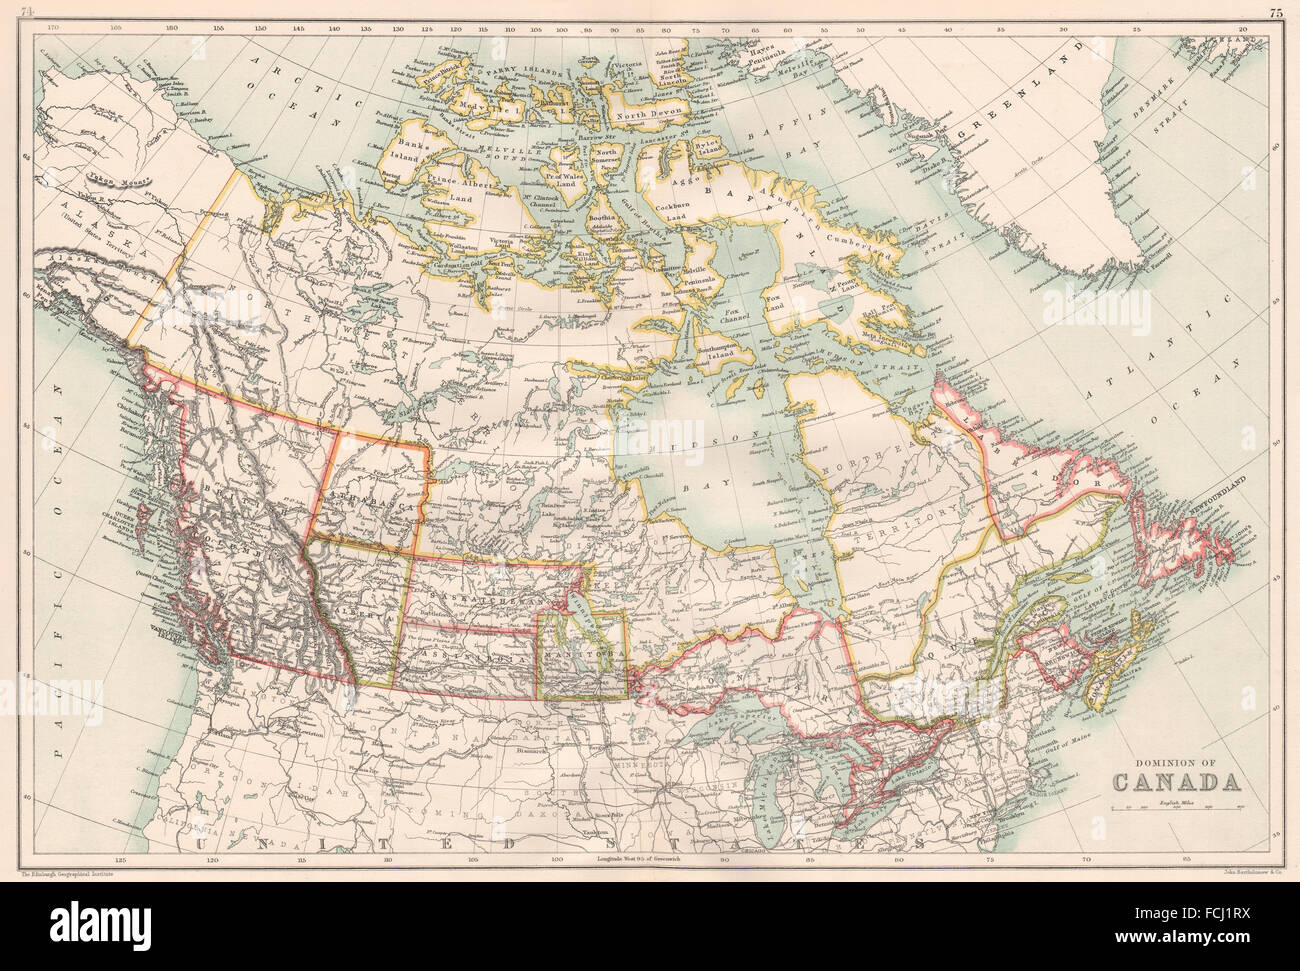 DOMINION OF CANADA: Shows provinces. Athabasca/Assiniboia, 1891 antique map Stock Photo